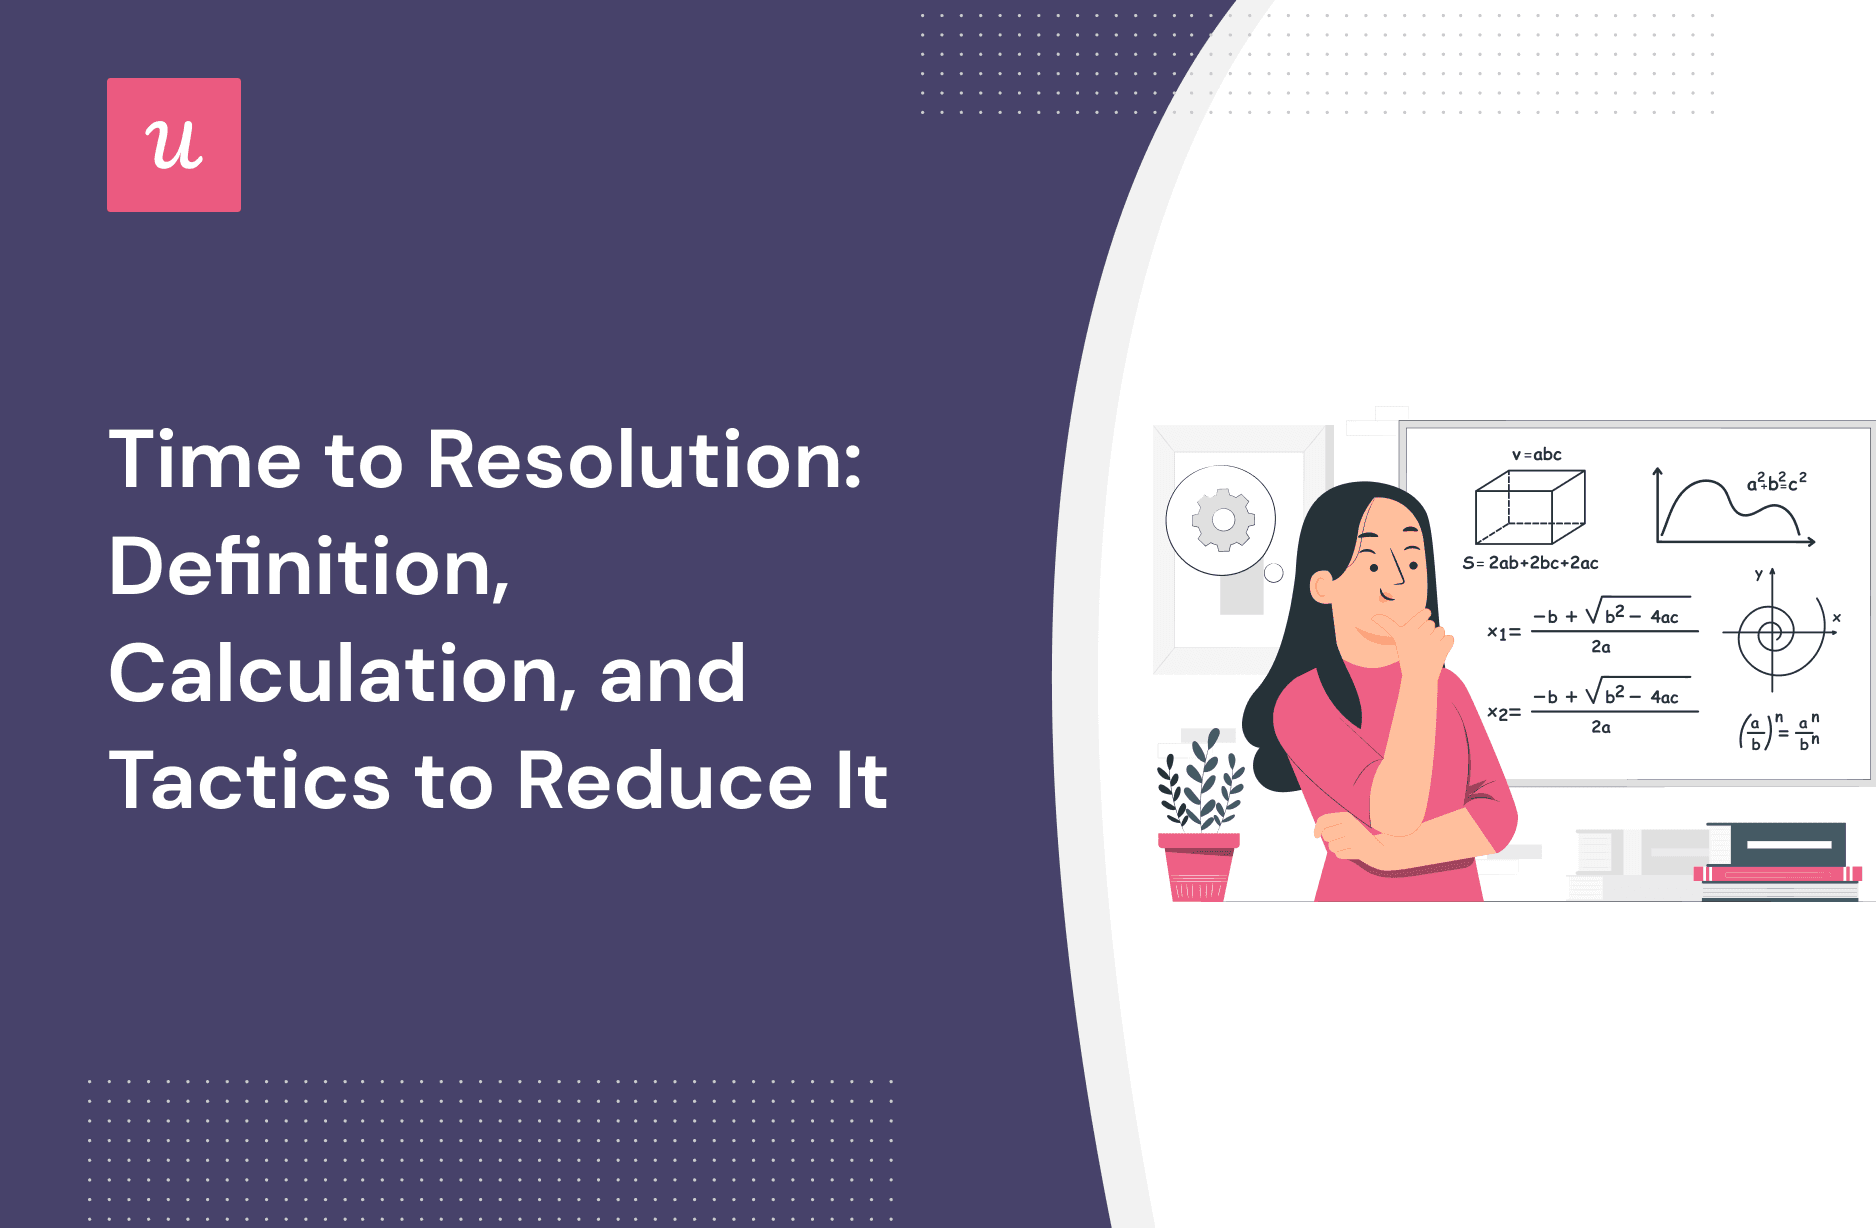 Time to Resolution: Definition, Calculation, and Tactics to Reduce It cover